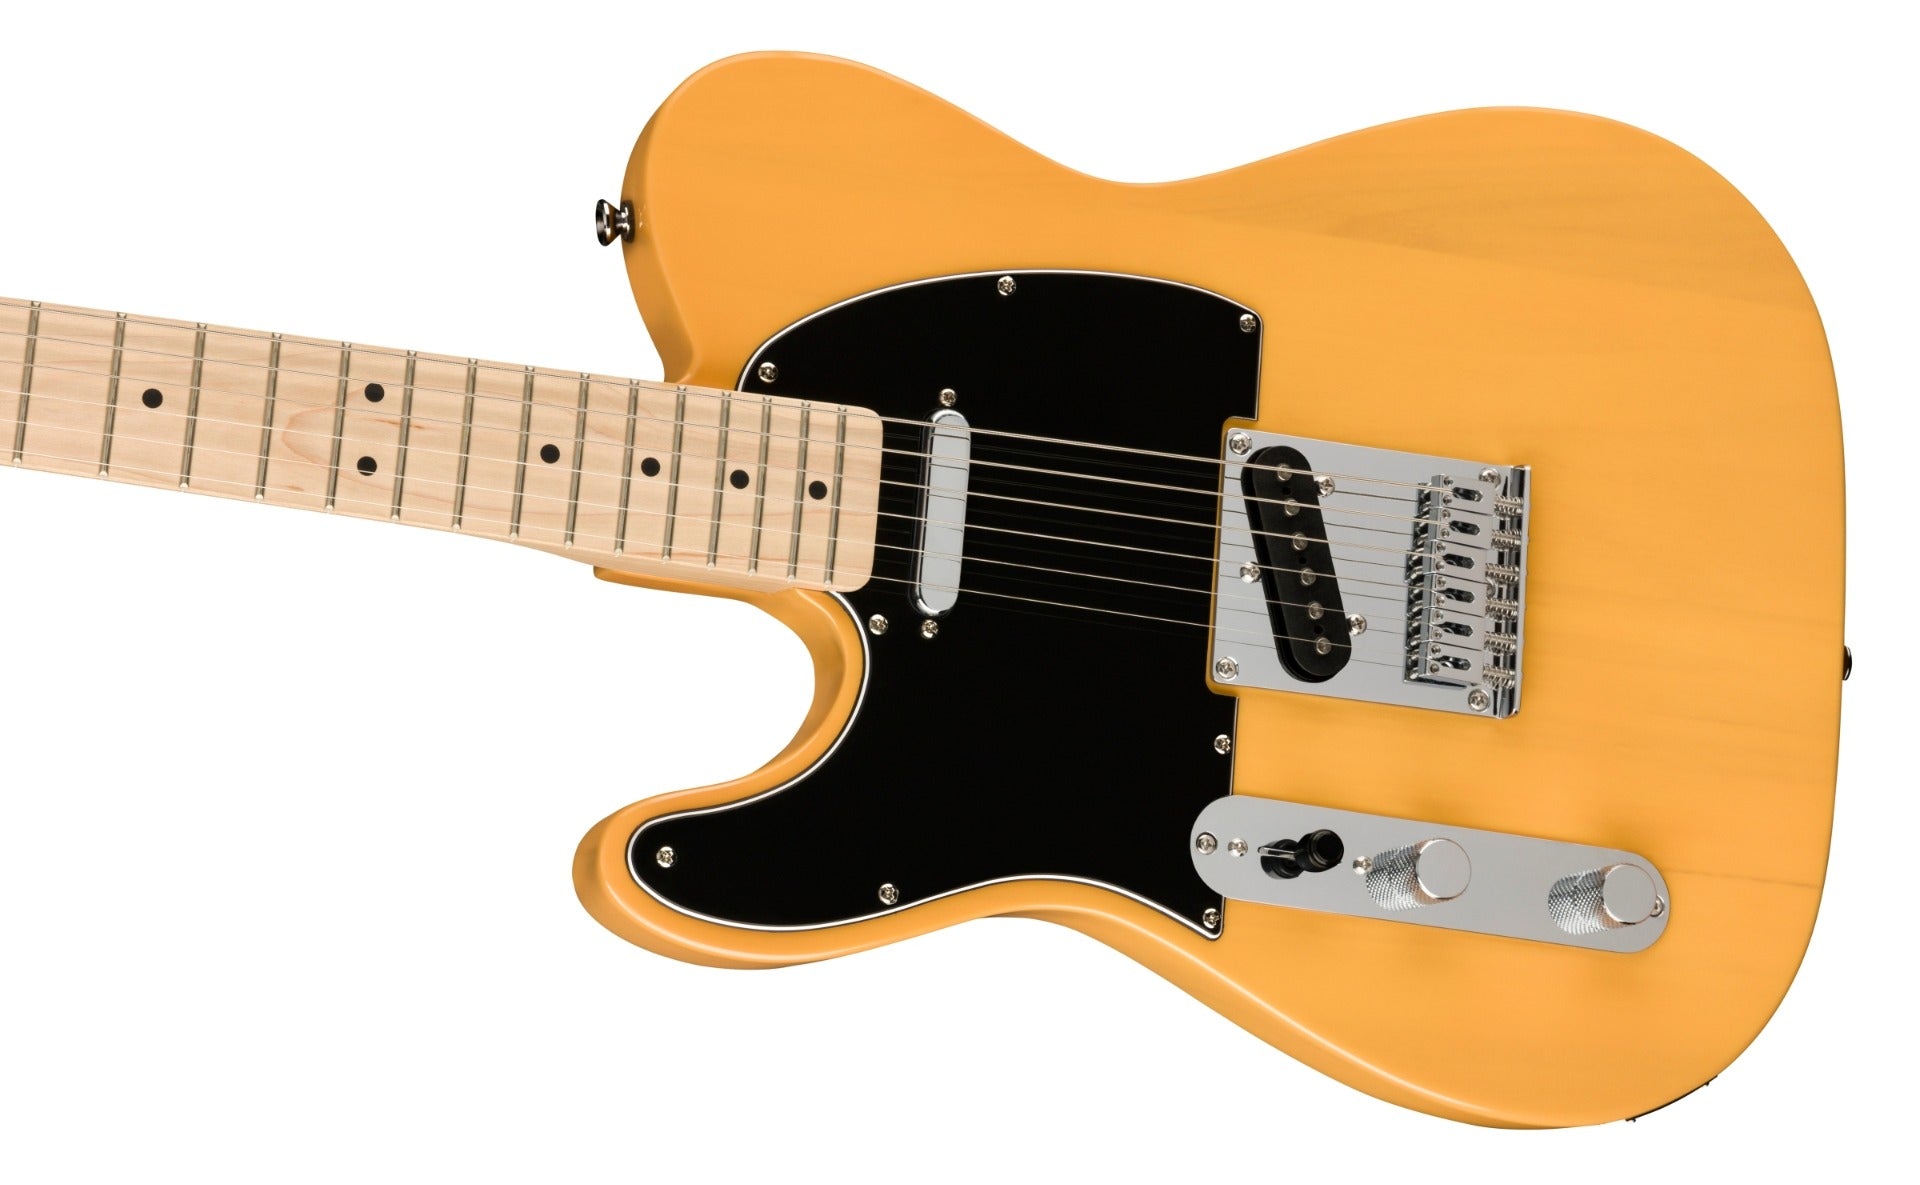 Squier Left-Handed Affinity Telecaster - Maple, Butterscotch Blonde, View 5